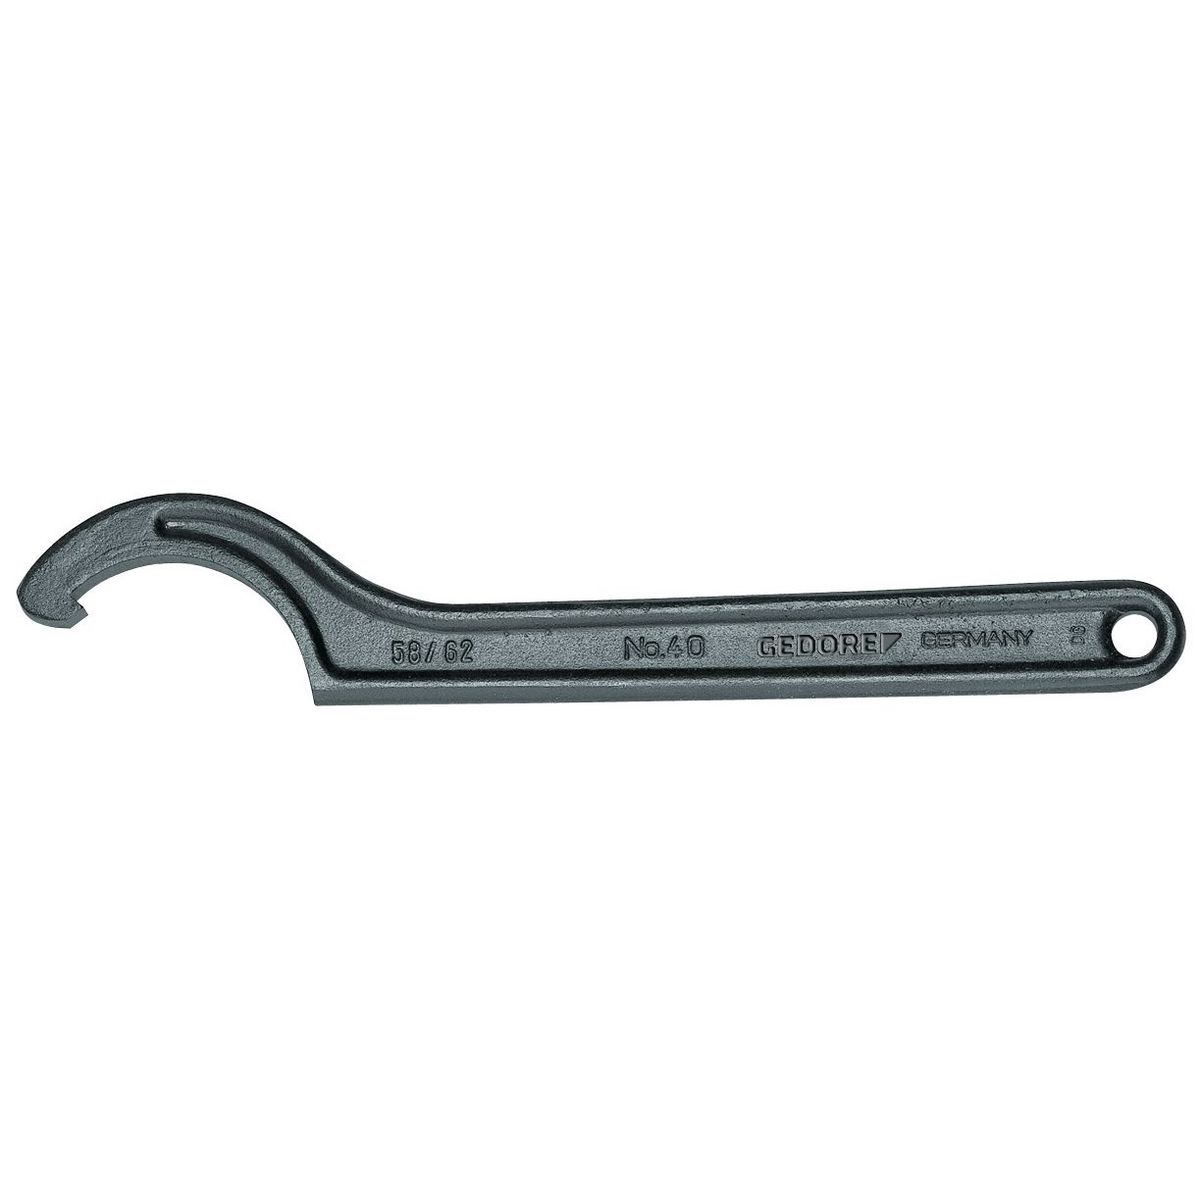 Hook wrench with lug, 30-32mm No.40 30-32 Gedore